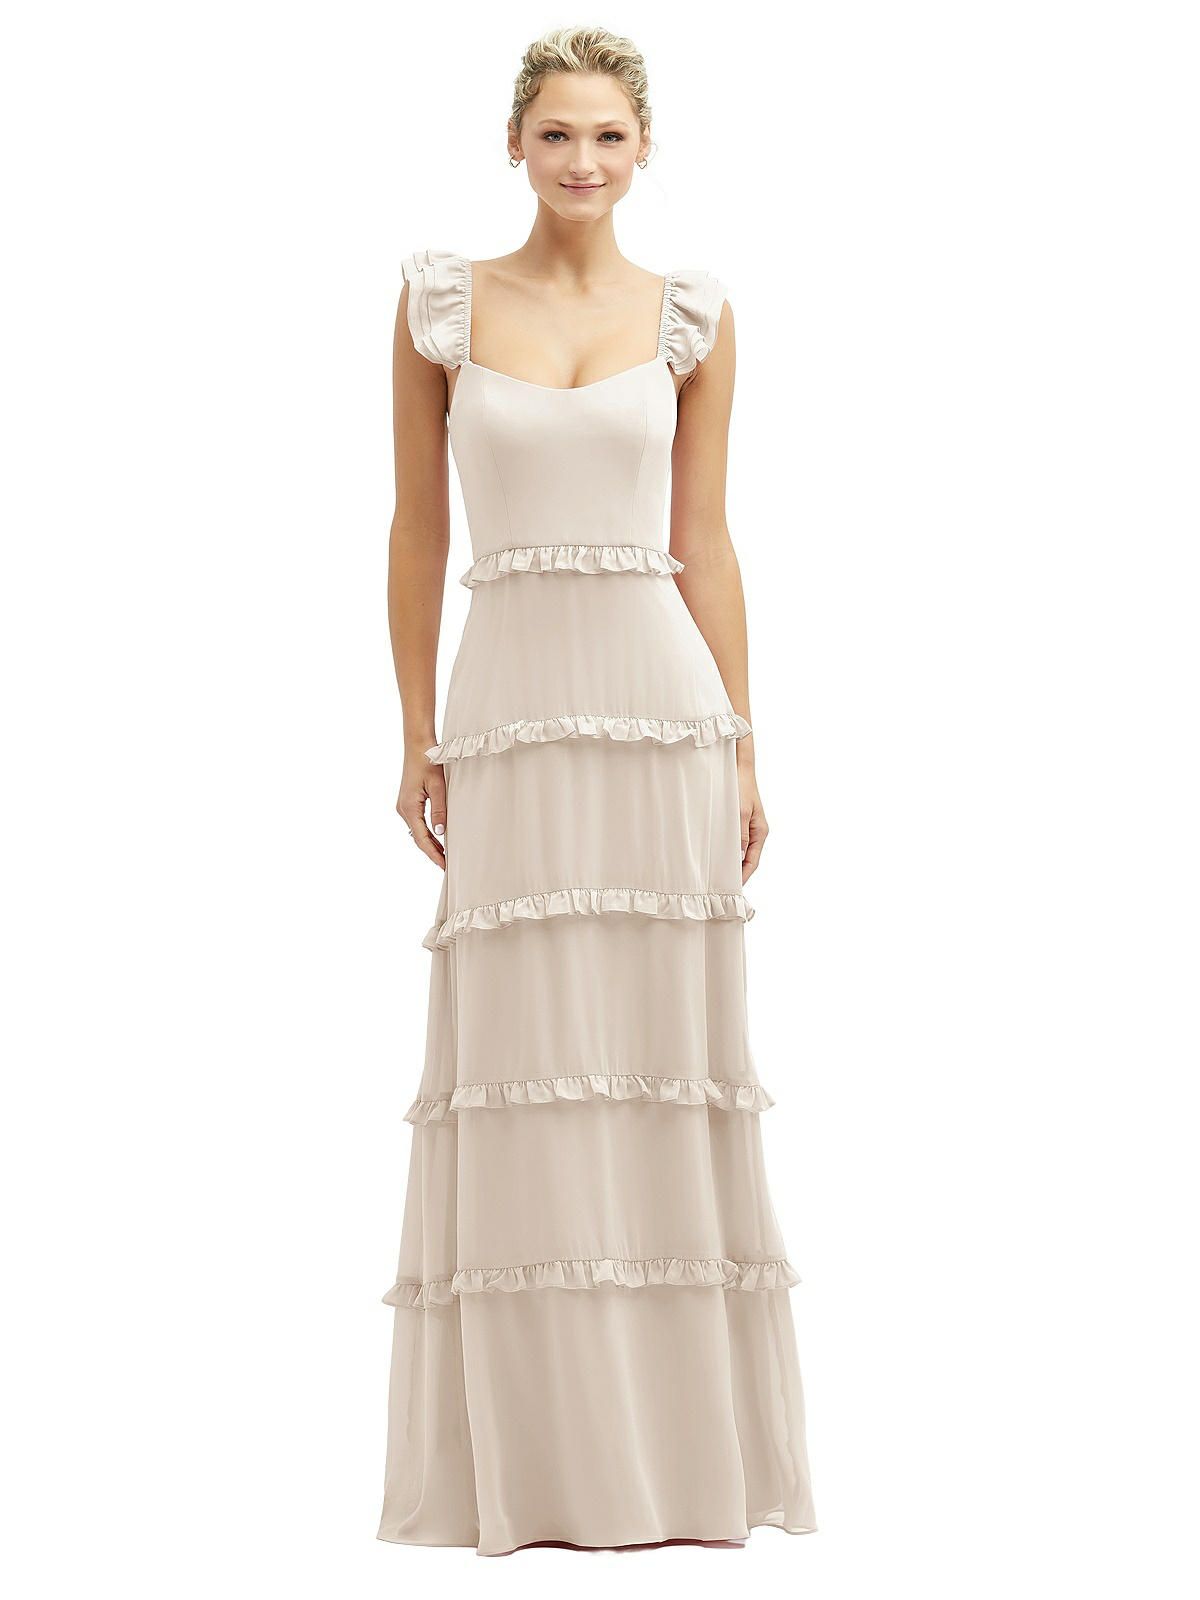 Tiered Chiffon Maxi A-line Dress with Convertible Ruffle Straps in Oat | The Dessy Group